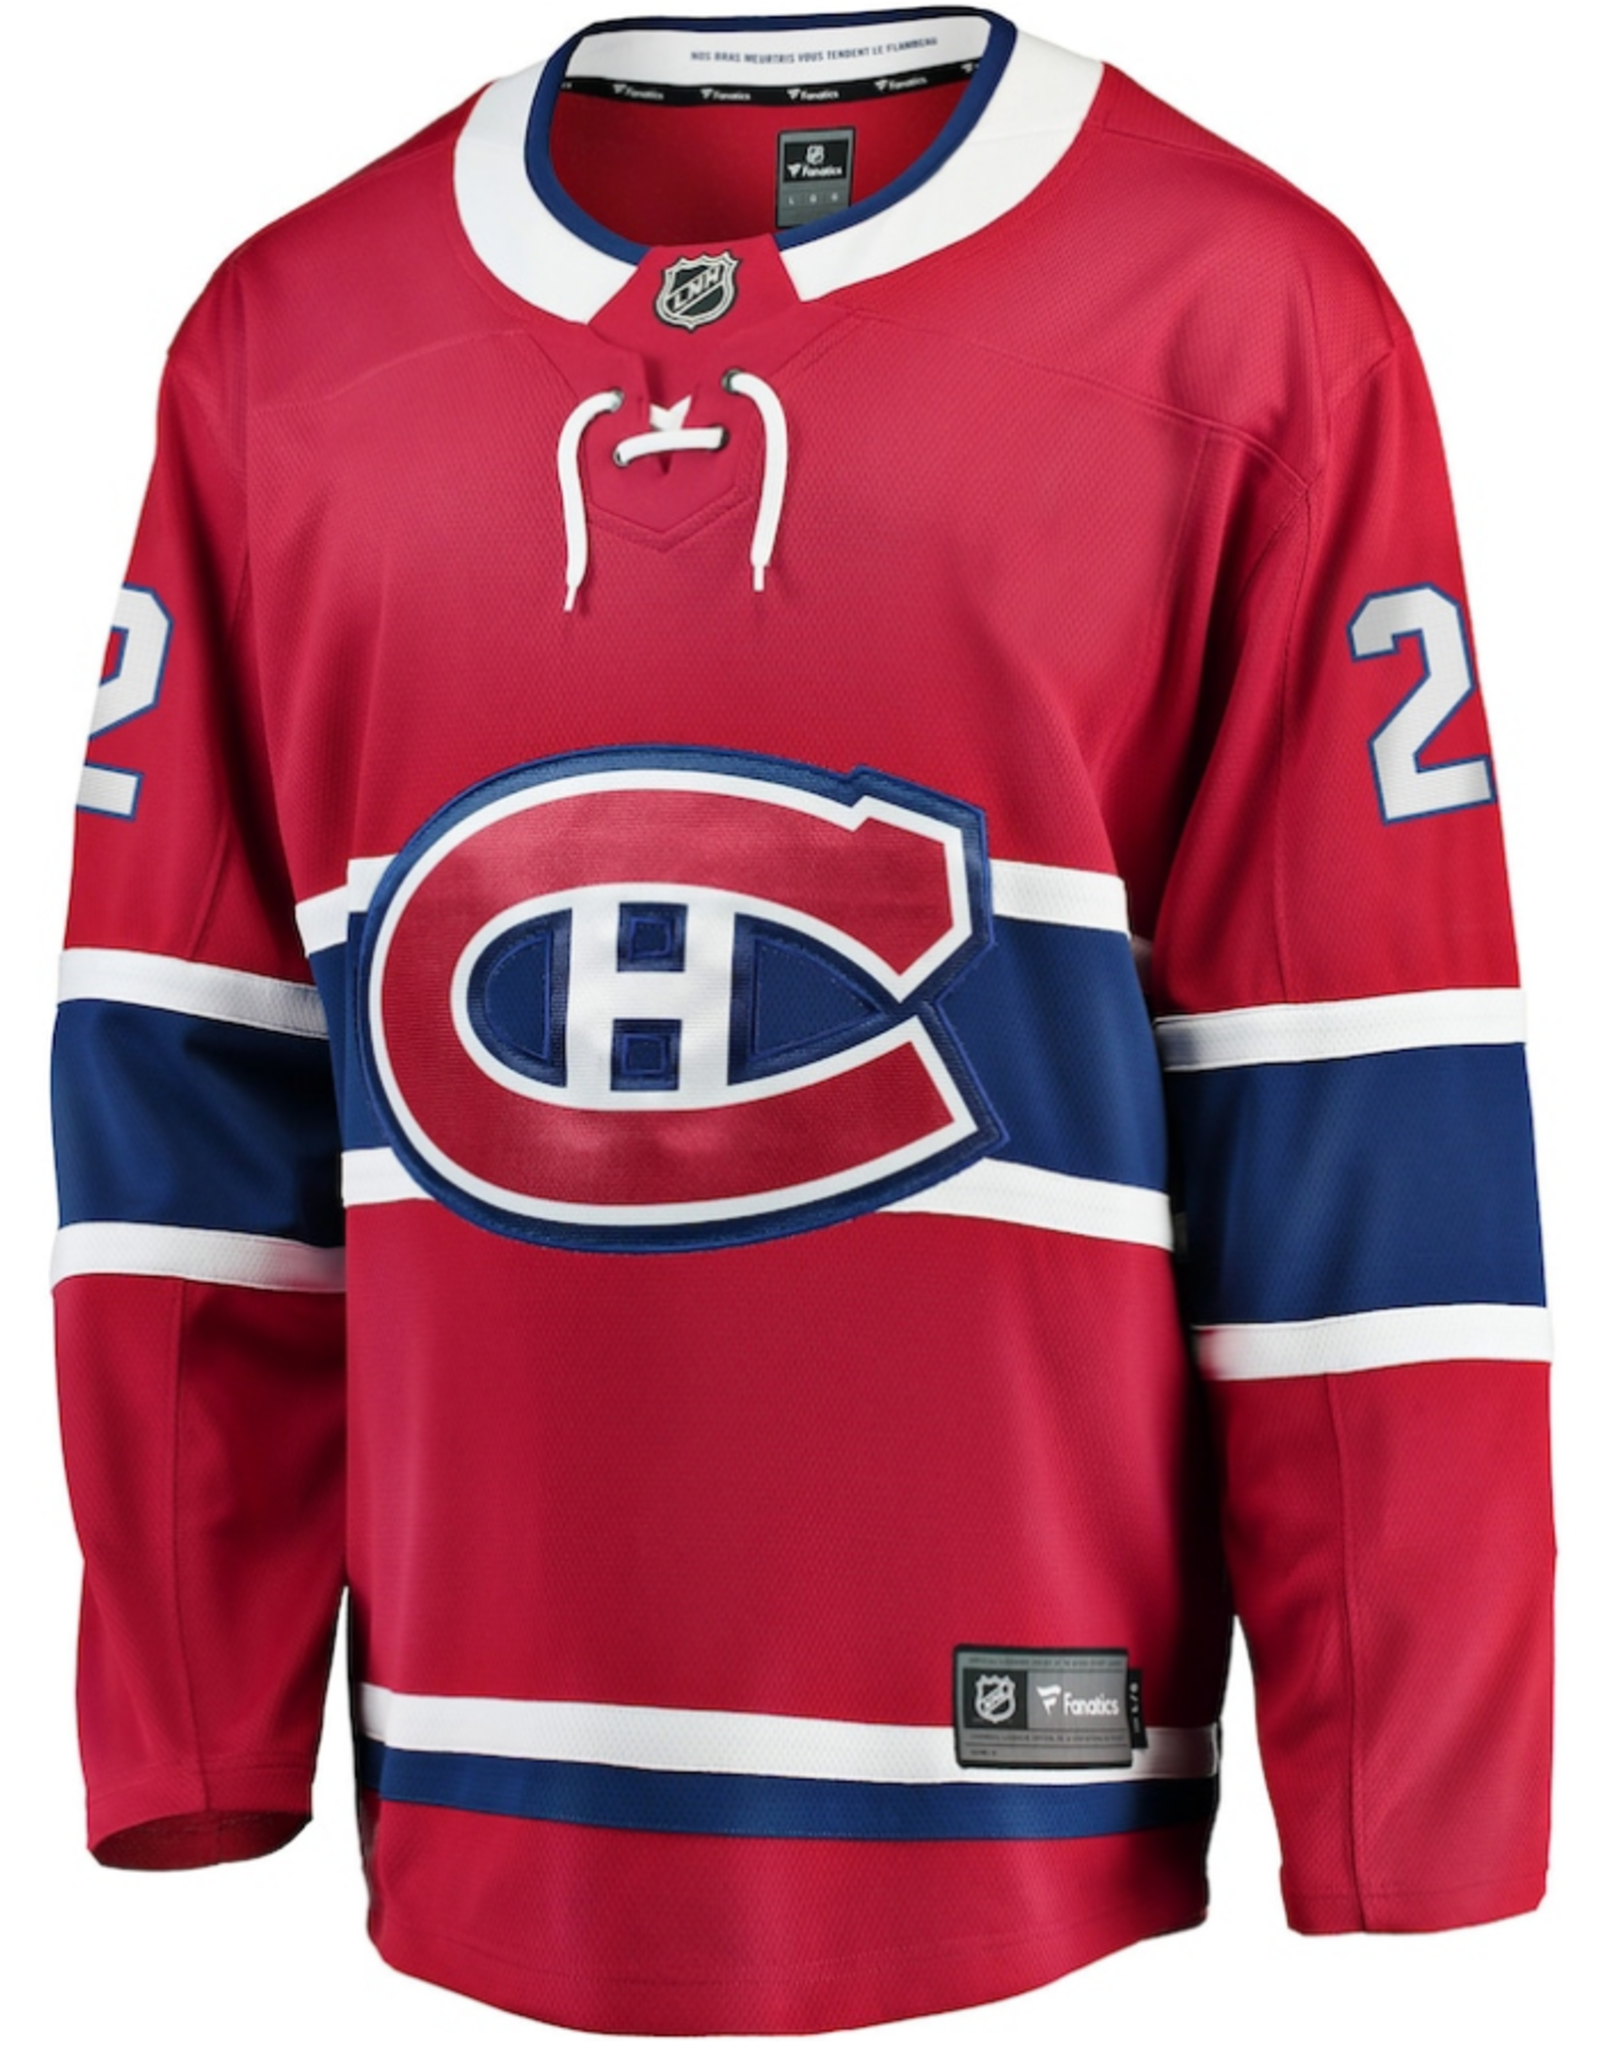 Cole Caufield Montreal Canadiens Fanatics Branded L Home Premier Breakaway Player - Jersey - Red